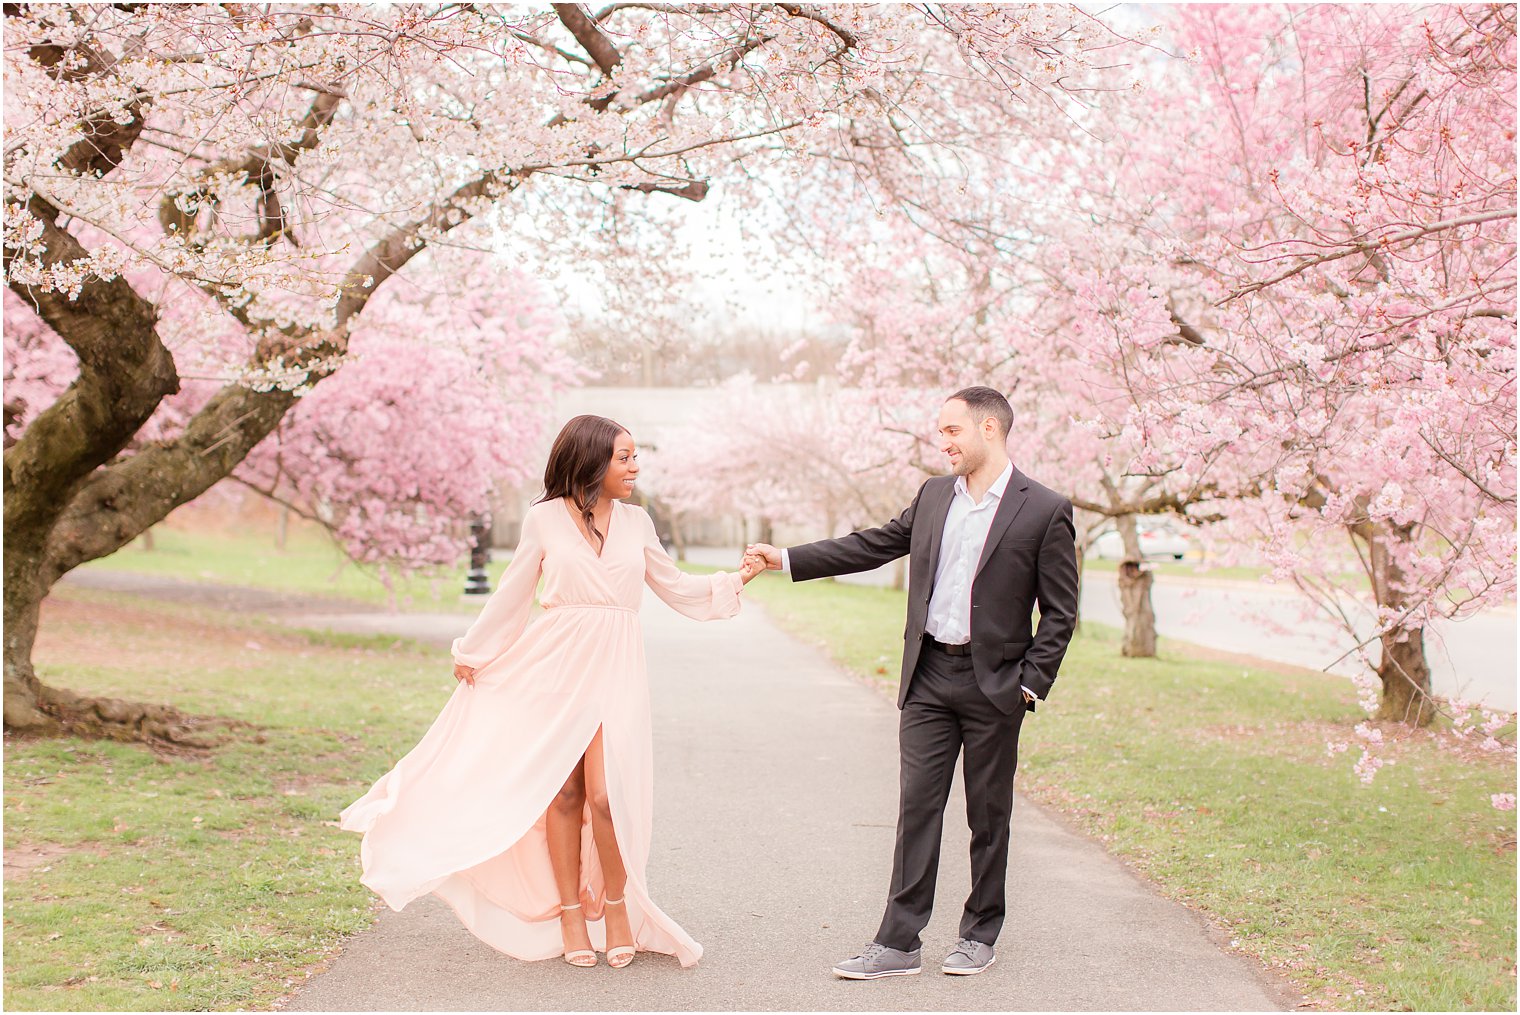 groom twirling his bride during engagement photos with cherry blossoms